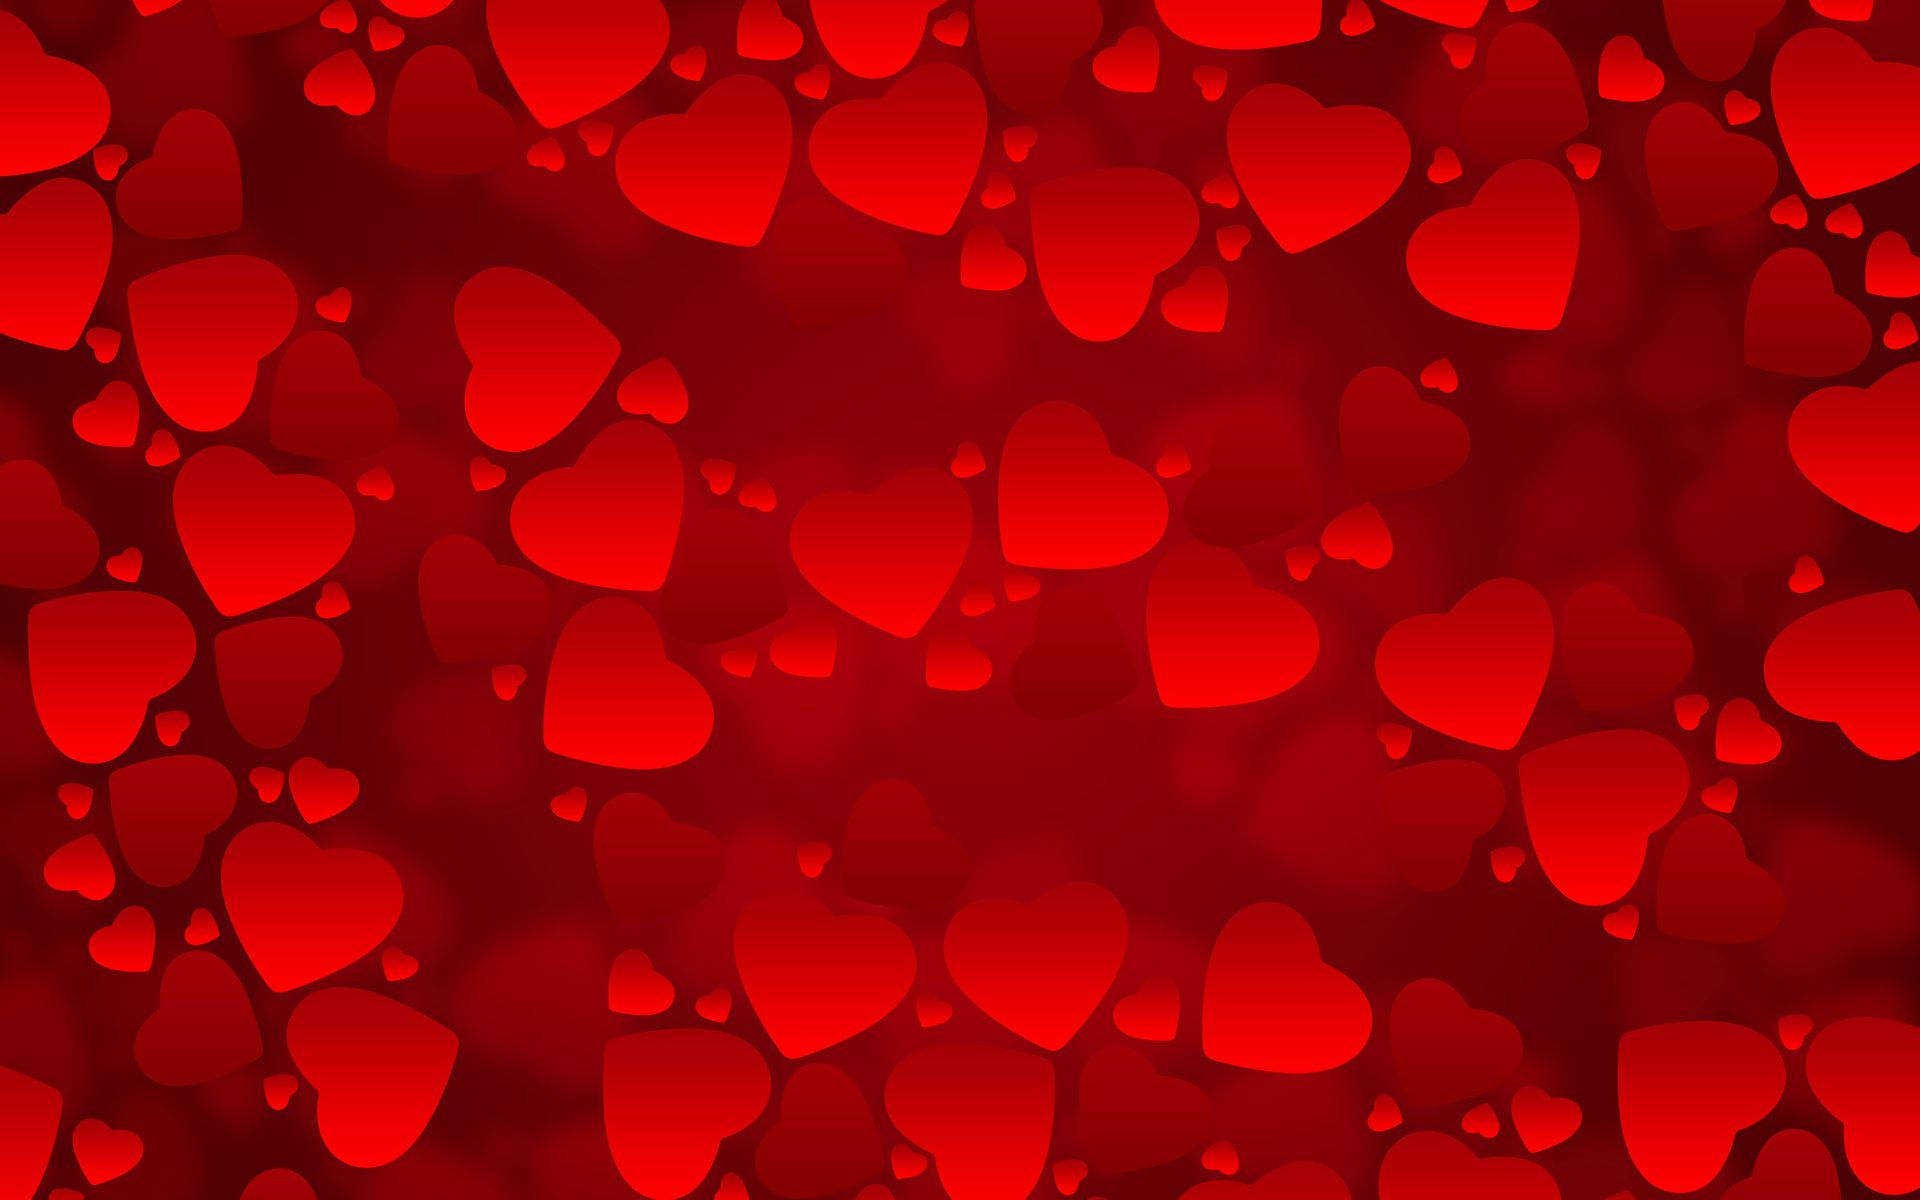 Red Love Hearts Background Wallpaper